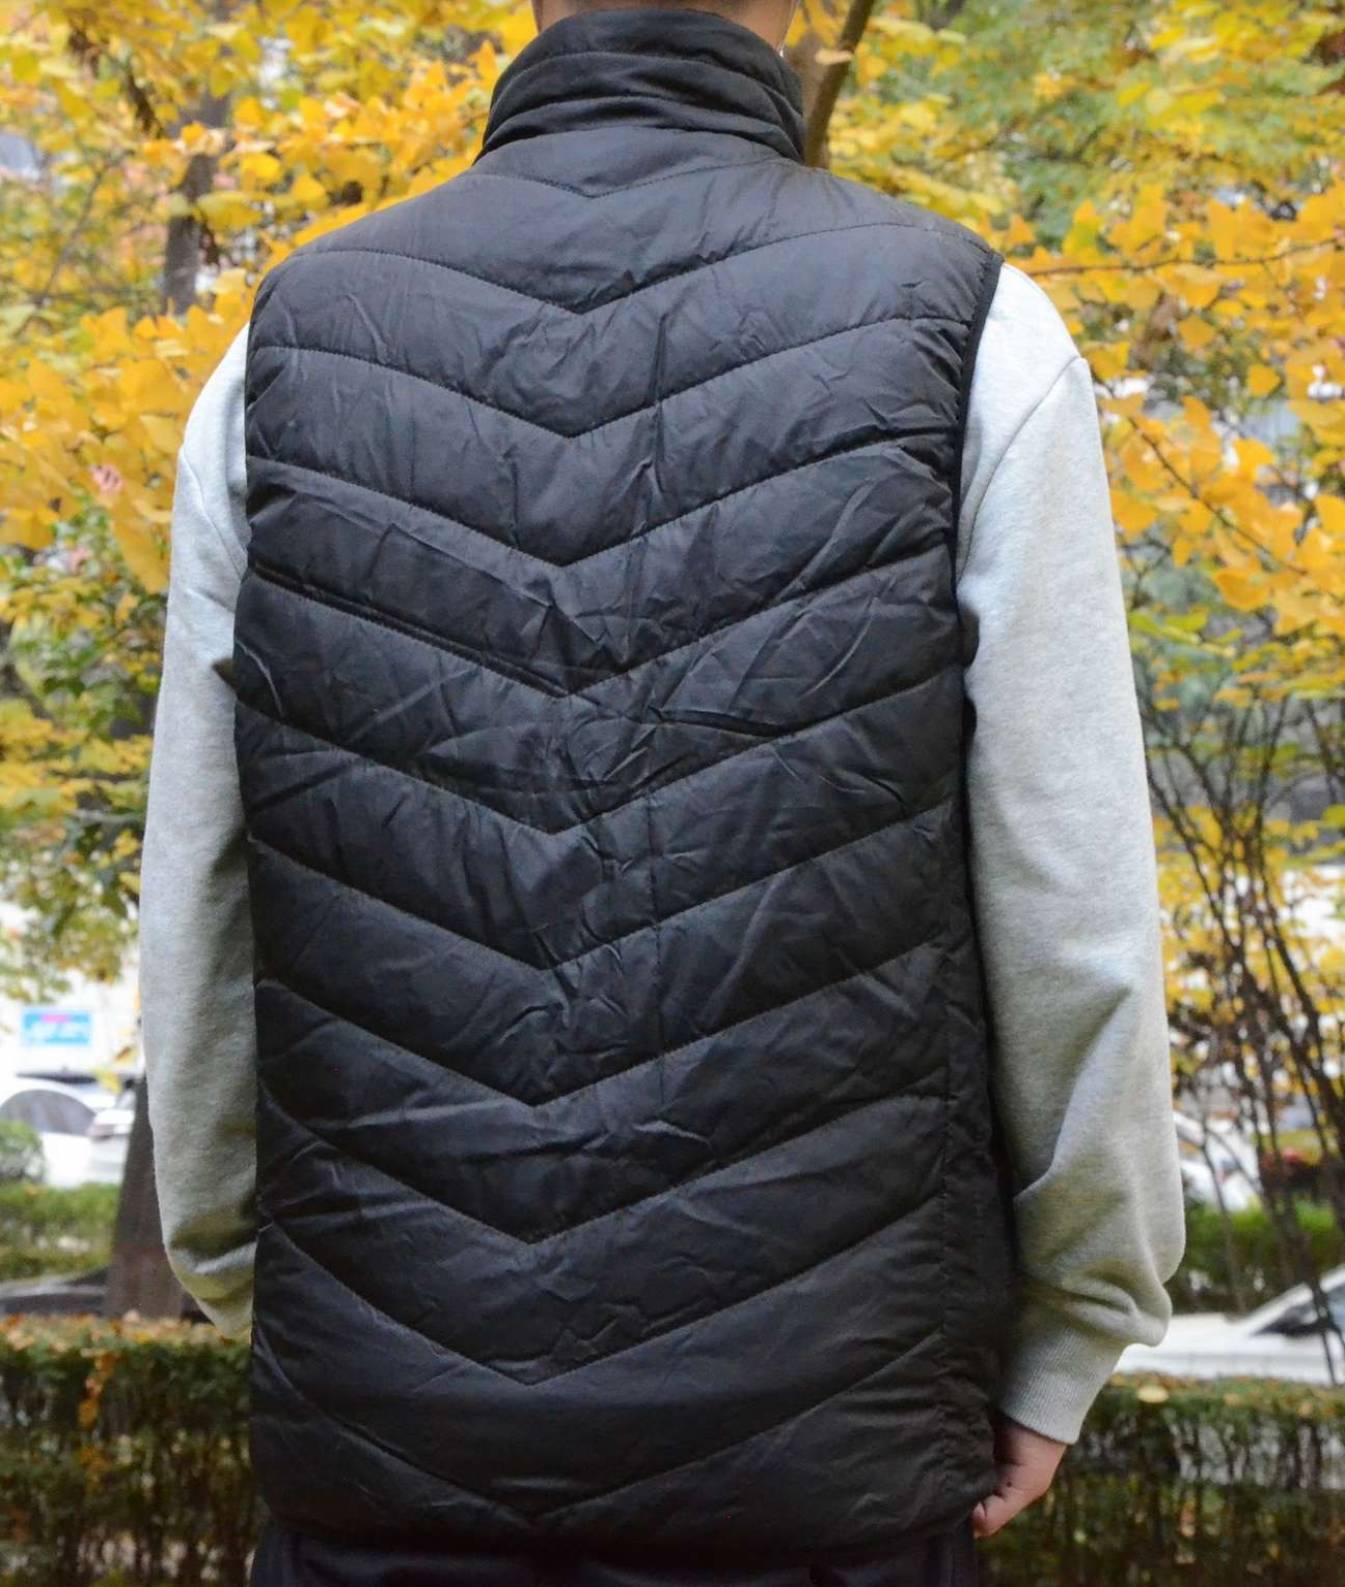 Most Popular Heated Vest